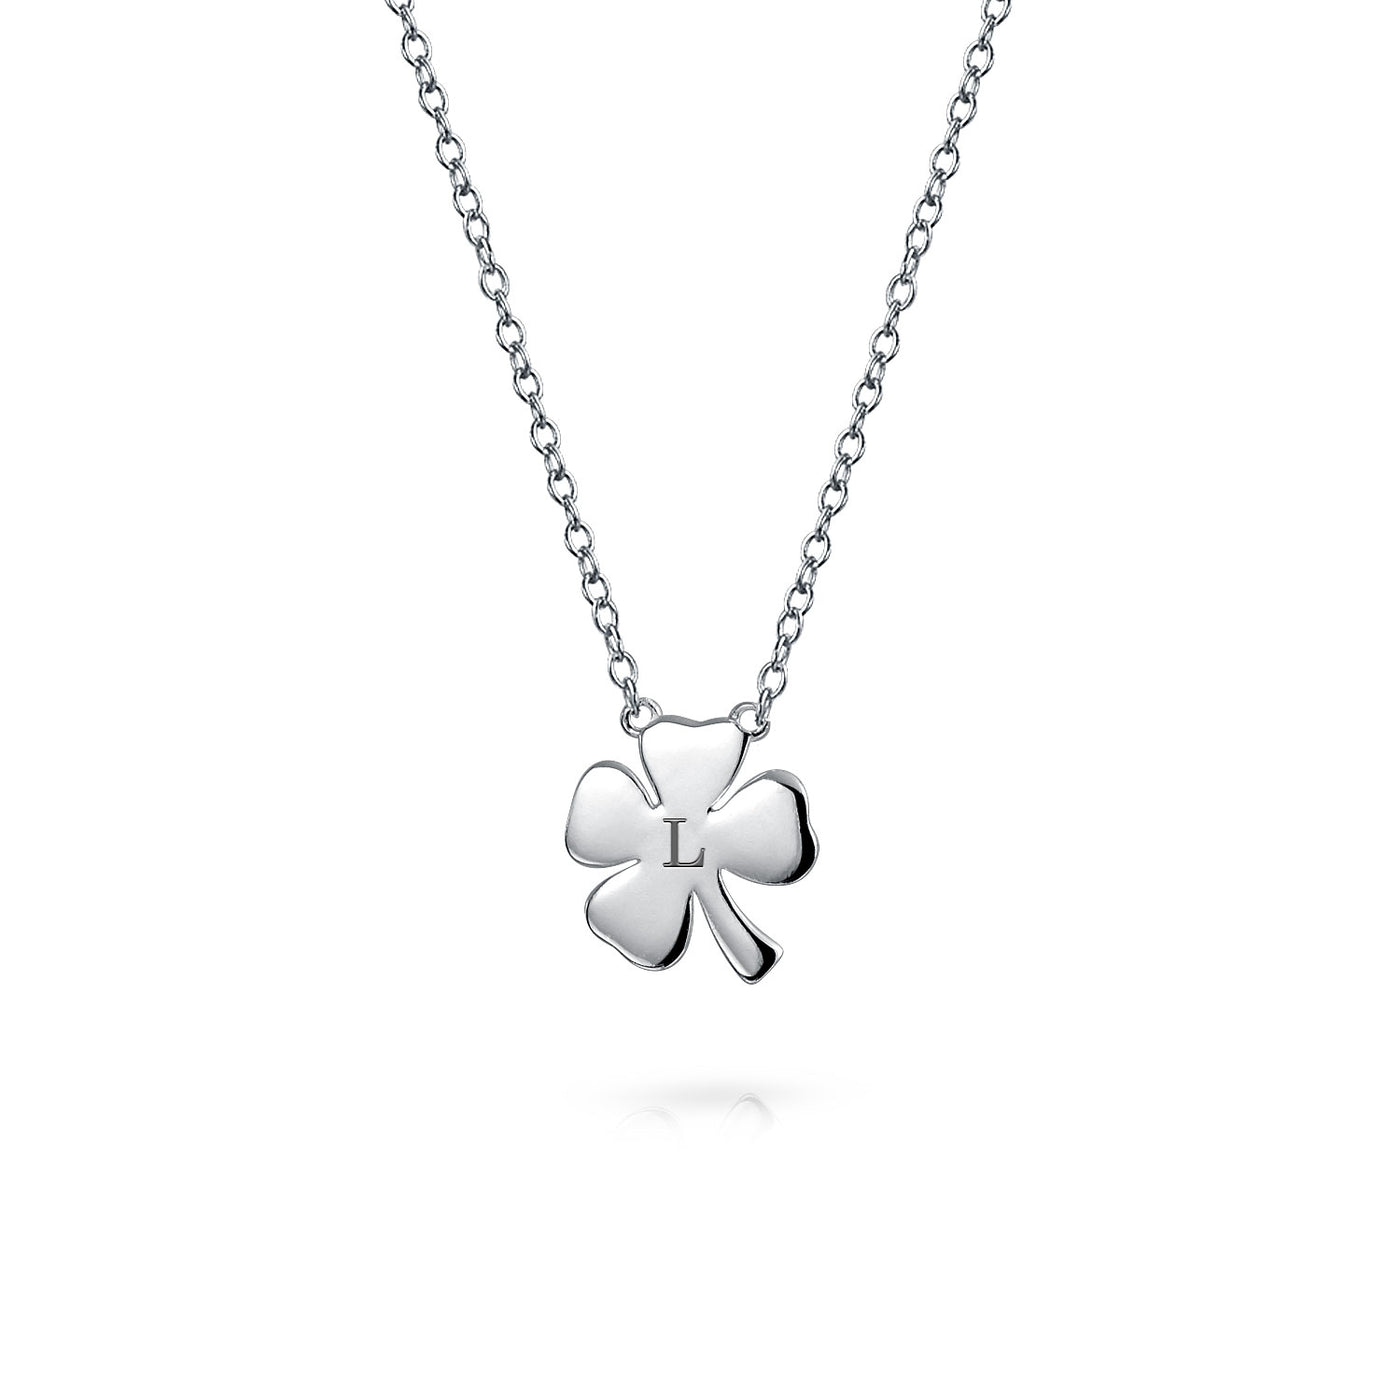 Lucky Clover Clip Charm, Charms For Bracelets and Necklaces